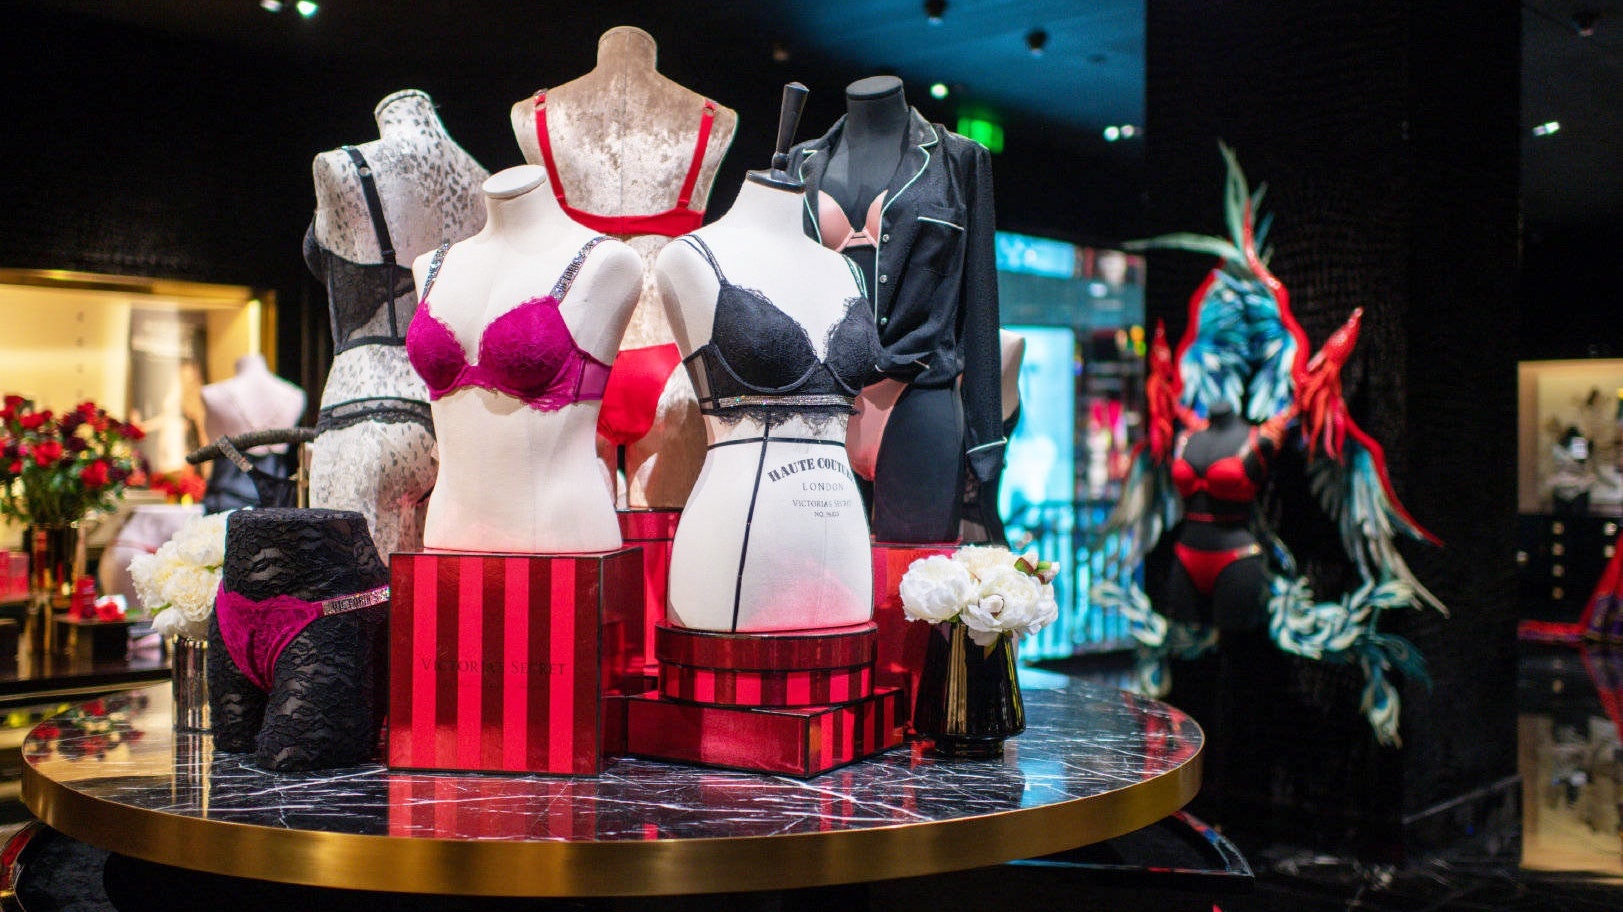 Why Victoria's Secret Body Positivity Spin Won't Work in China